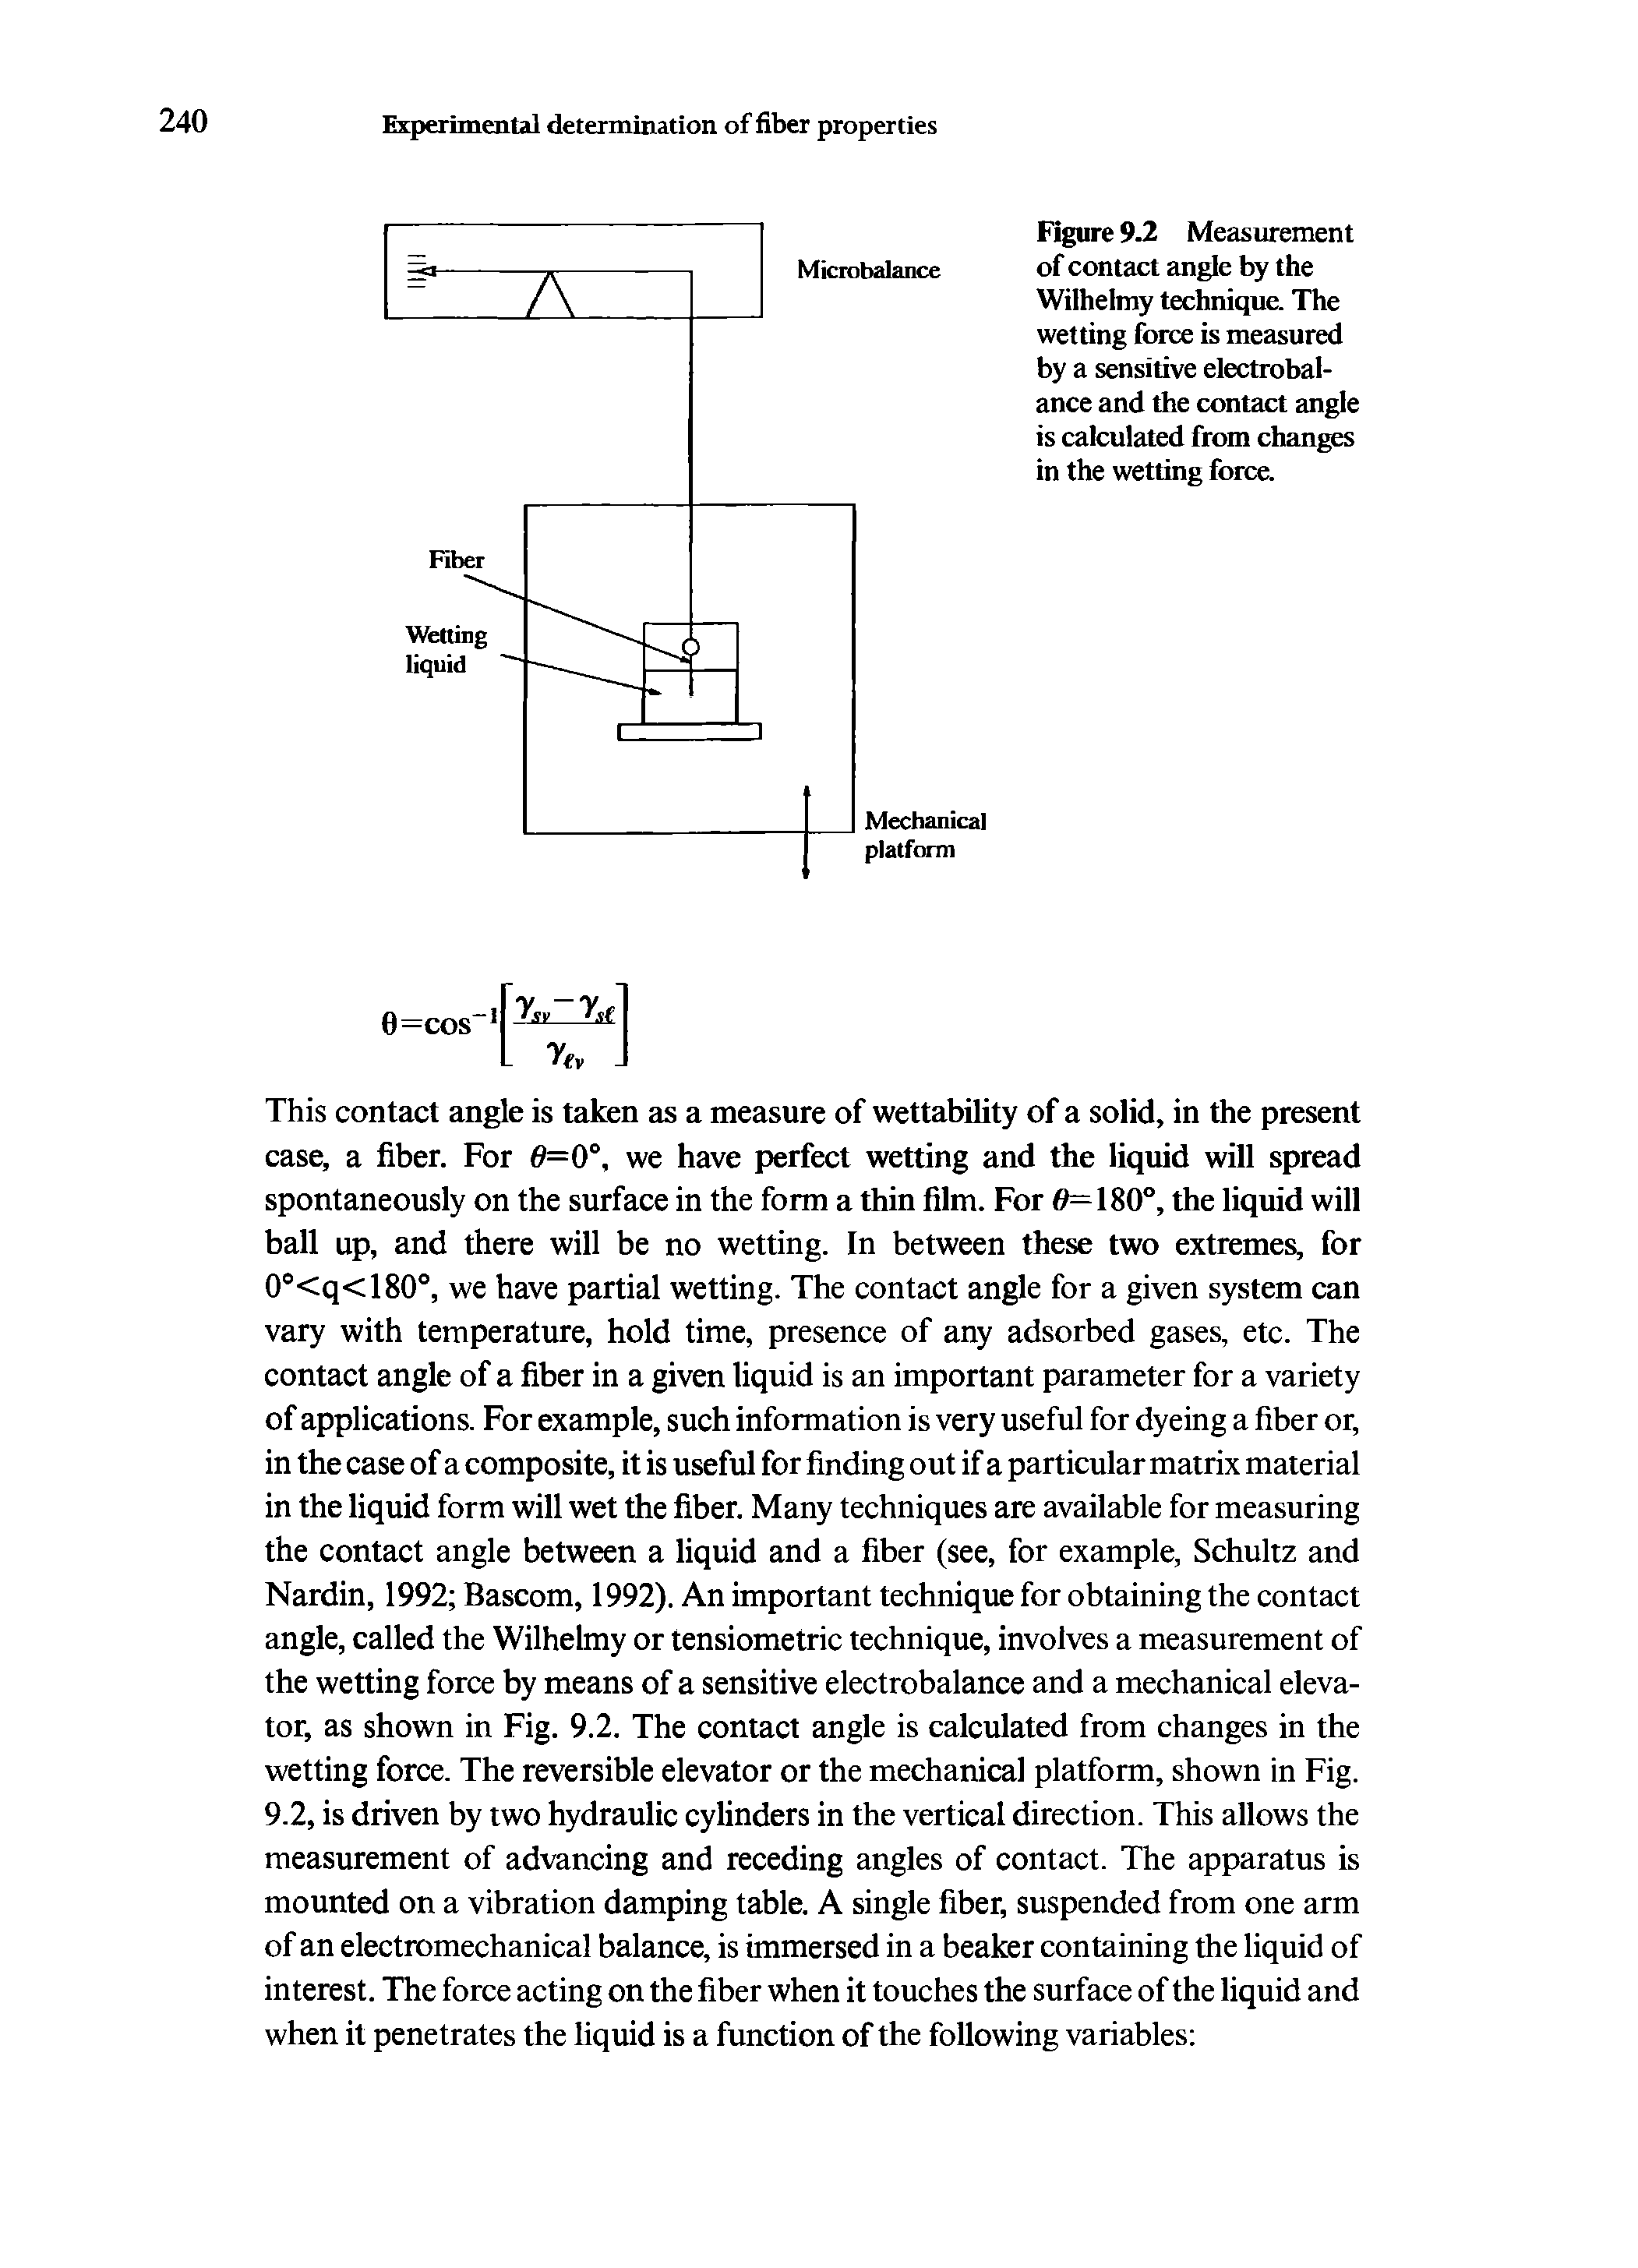 Figure 9.2 Measurement of contact angle by the Wilhelmy technique. The wetting force is measured by a sensitive electrobalance and the contact angle is calculated from changes in the wetting force.